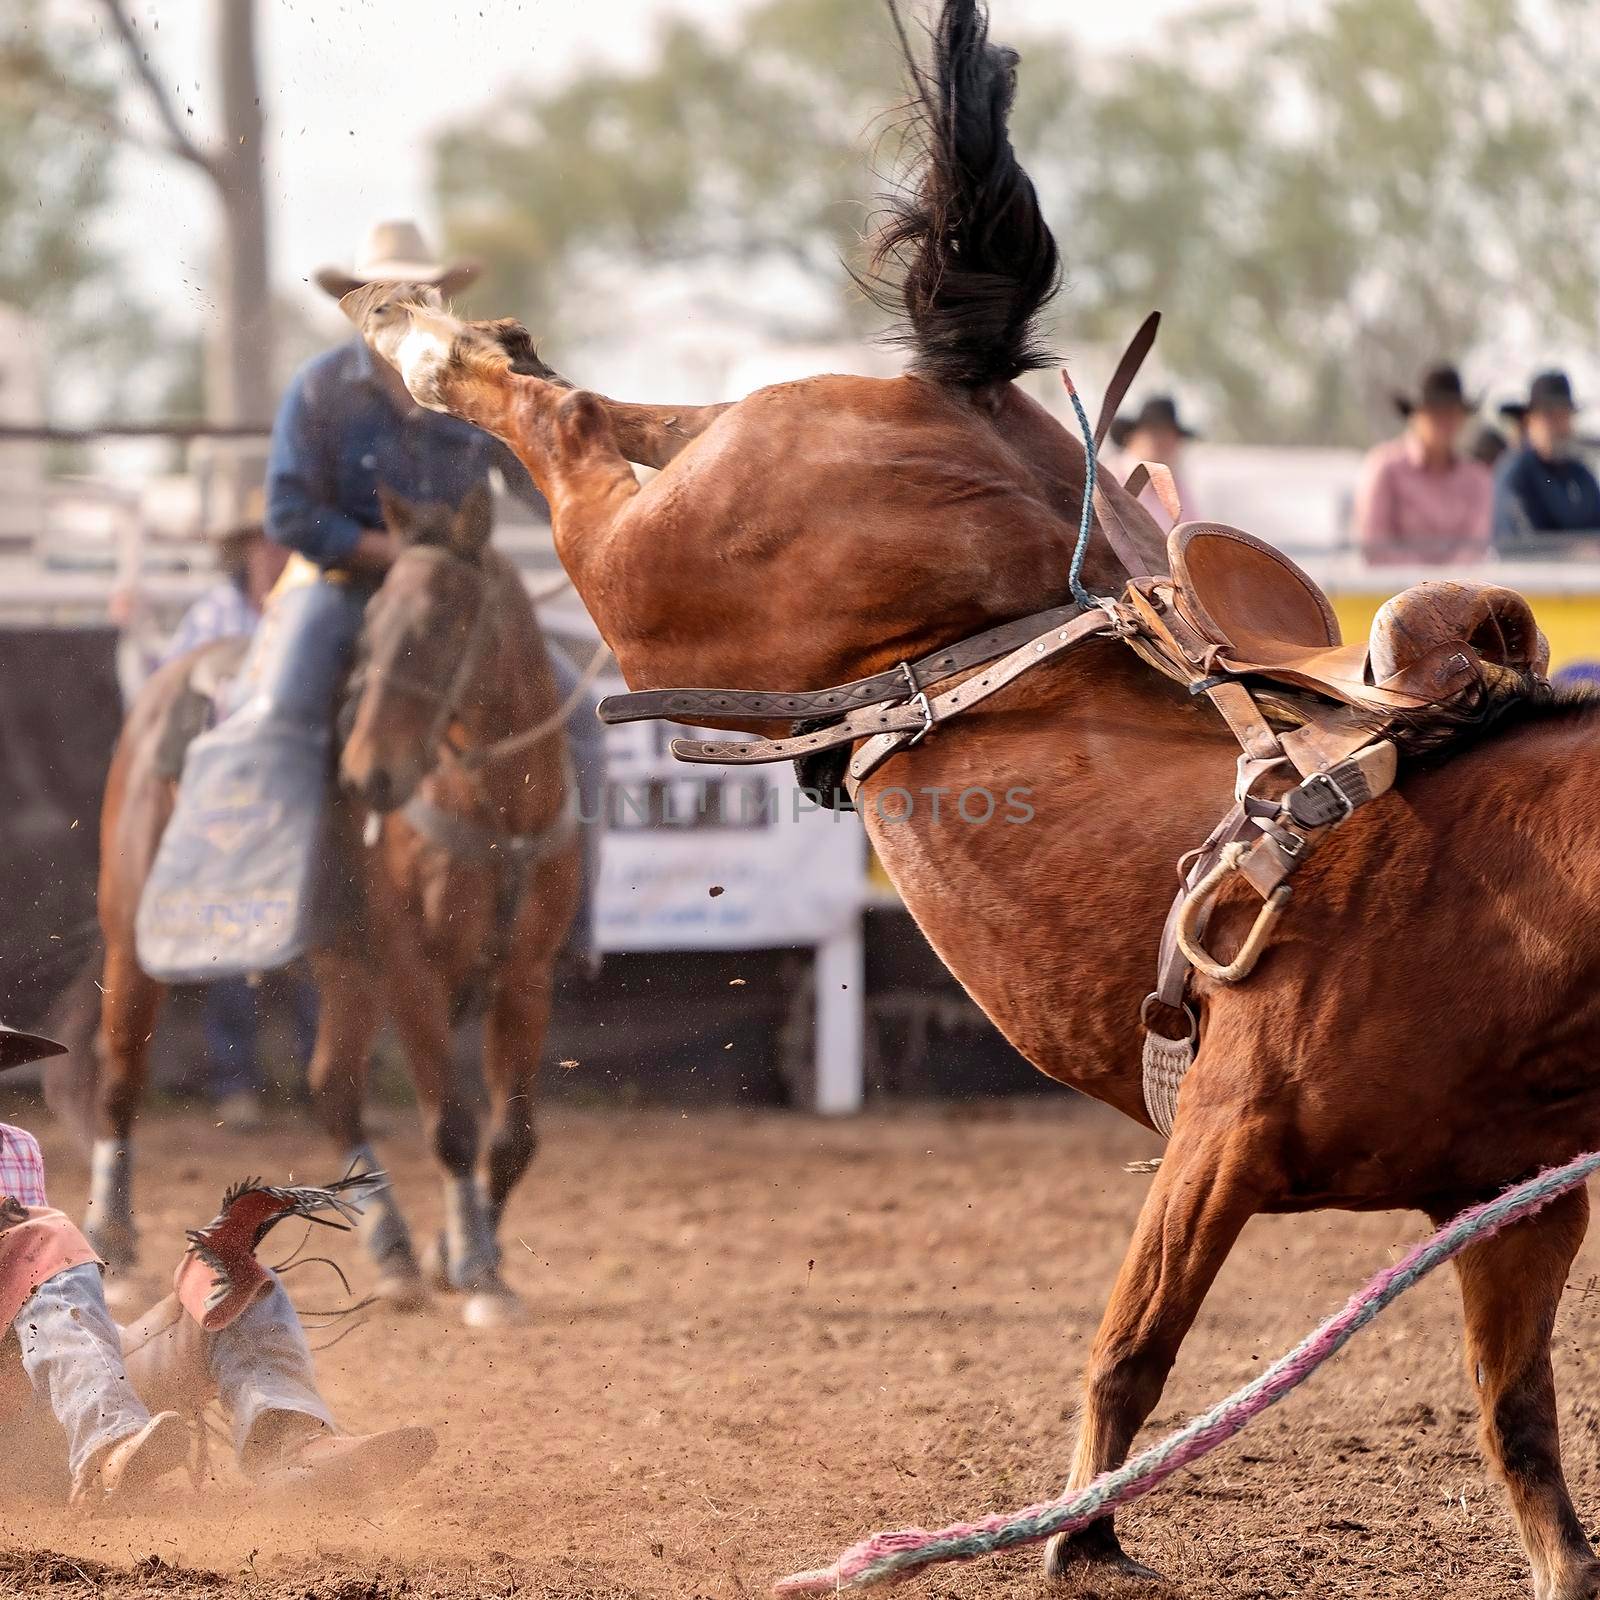 Wild bronco has bucked off his cowboy rider at a country rodeo Australia